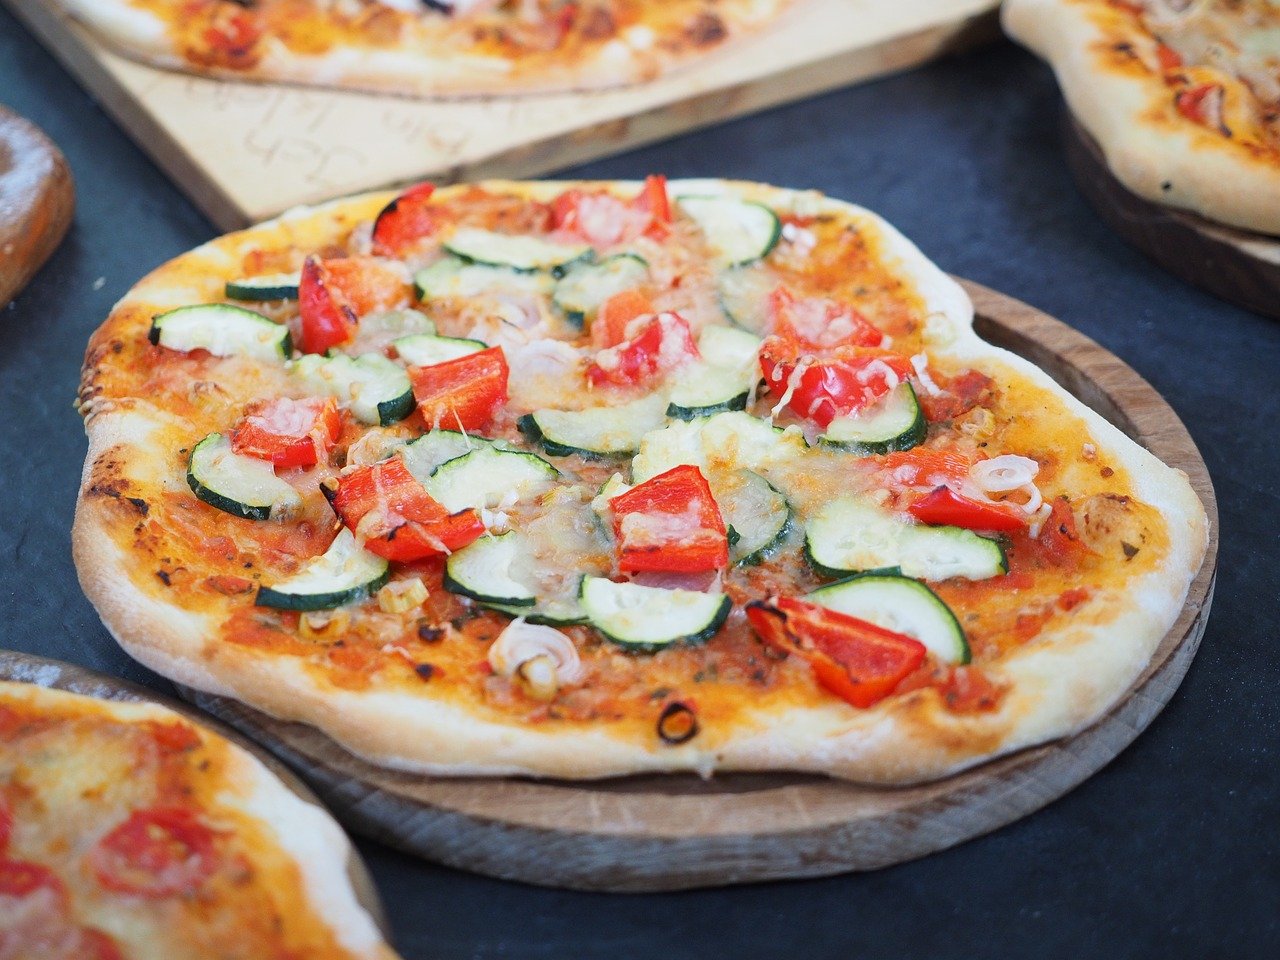 Some Curious Trends for Diversifying Your Pizzas